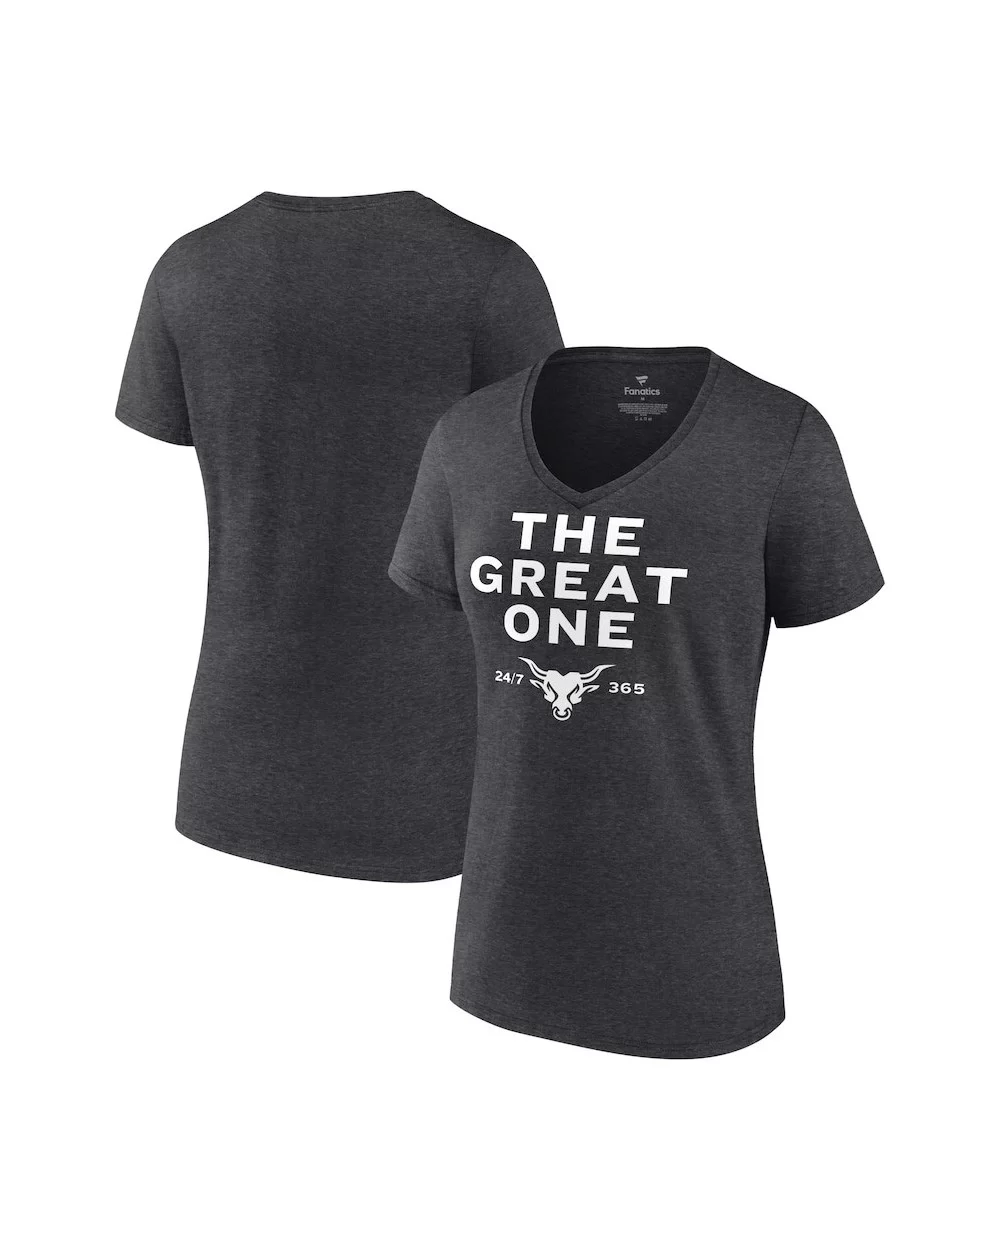 Men's Fanatics Branded Charcoal The Rock The Great One V-Neck T-Shirt $8.64 T-Shirts